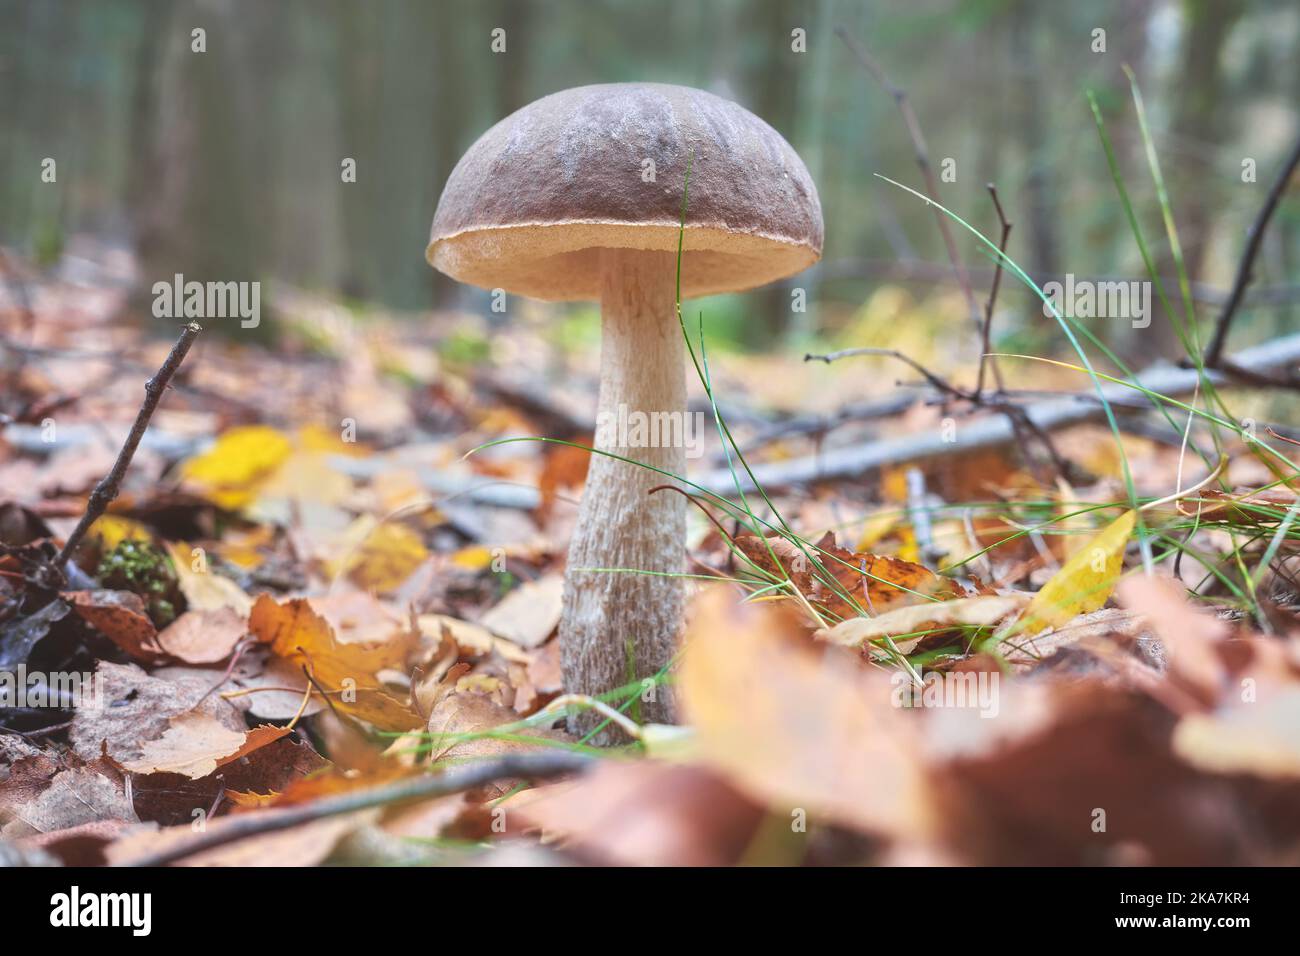 Close up picture of an edible mushroom in a forest, selective focus on the cap. Stock Photo